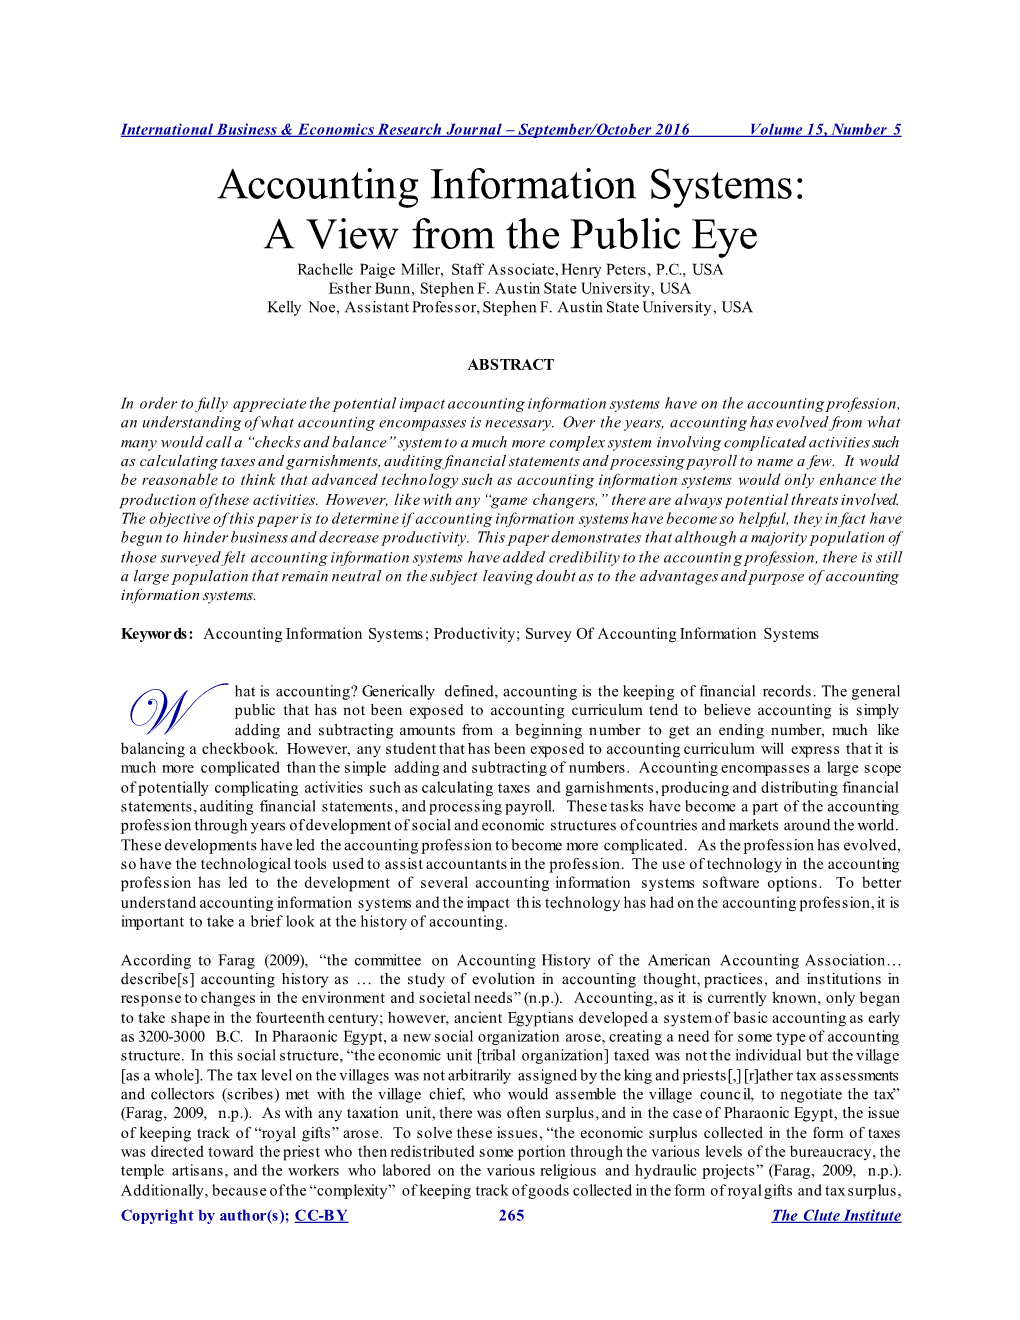 Accounting Information Systems: a View from the Public Eye Rachelle Paige Miller, Staff Associate, Henry Peters, P.C., USA Esther Bunn, Stephen F